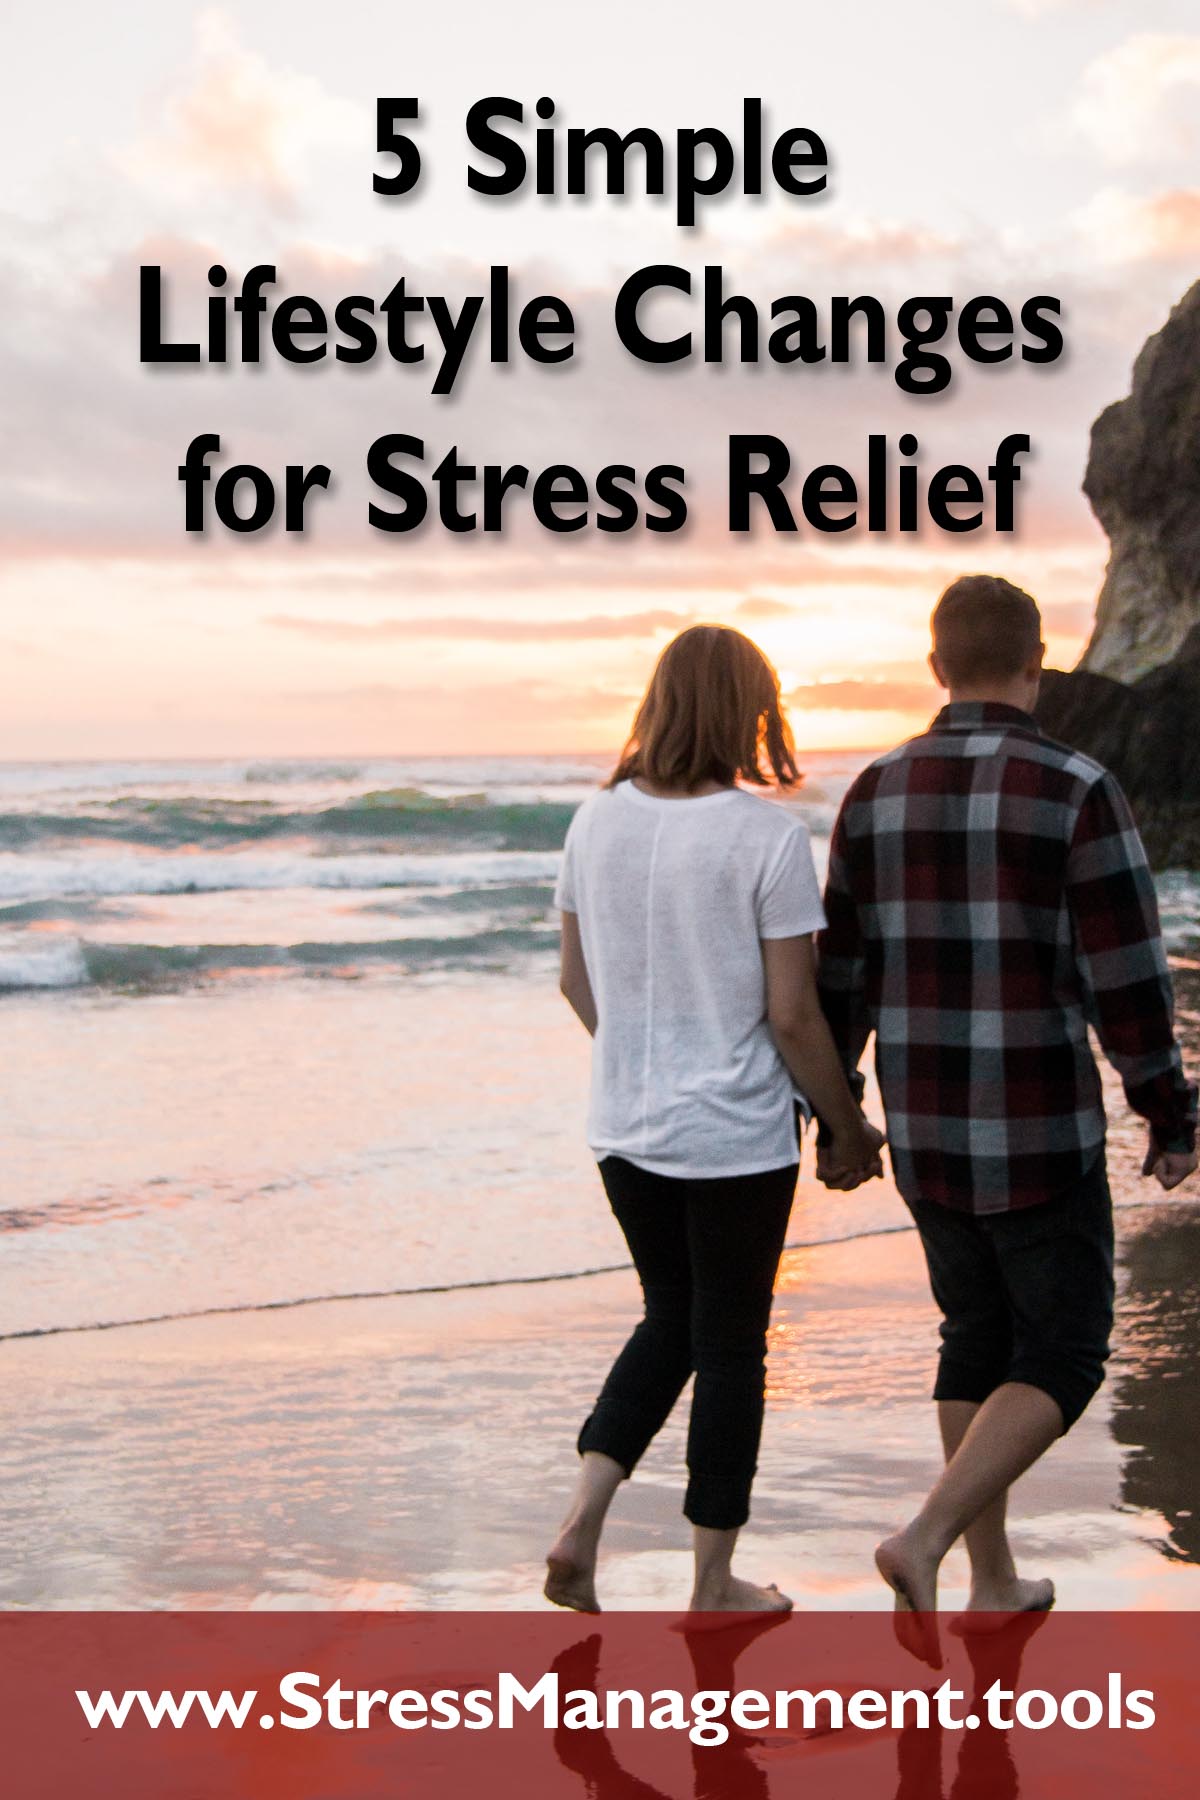 5 Simple Lifestyle Changes for Stress Relief